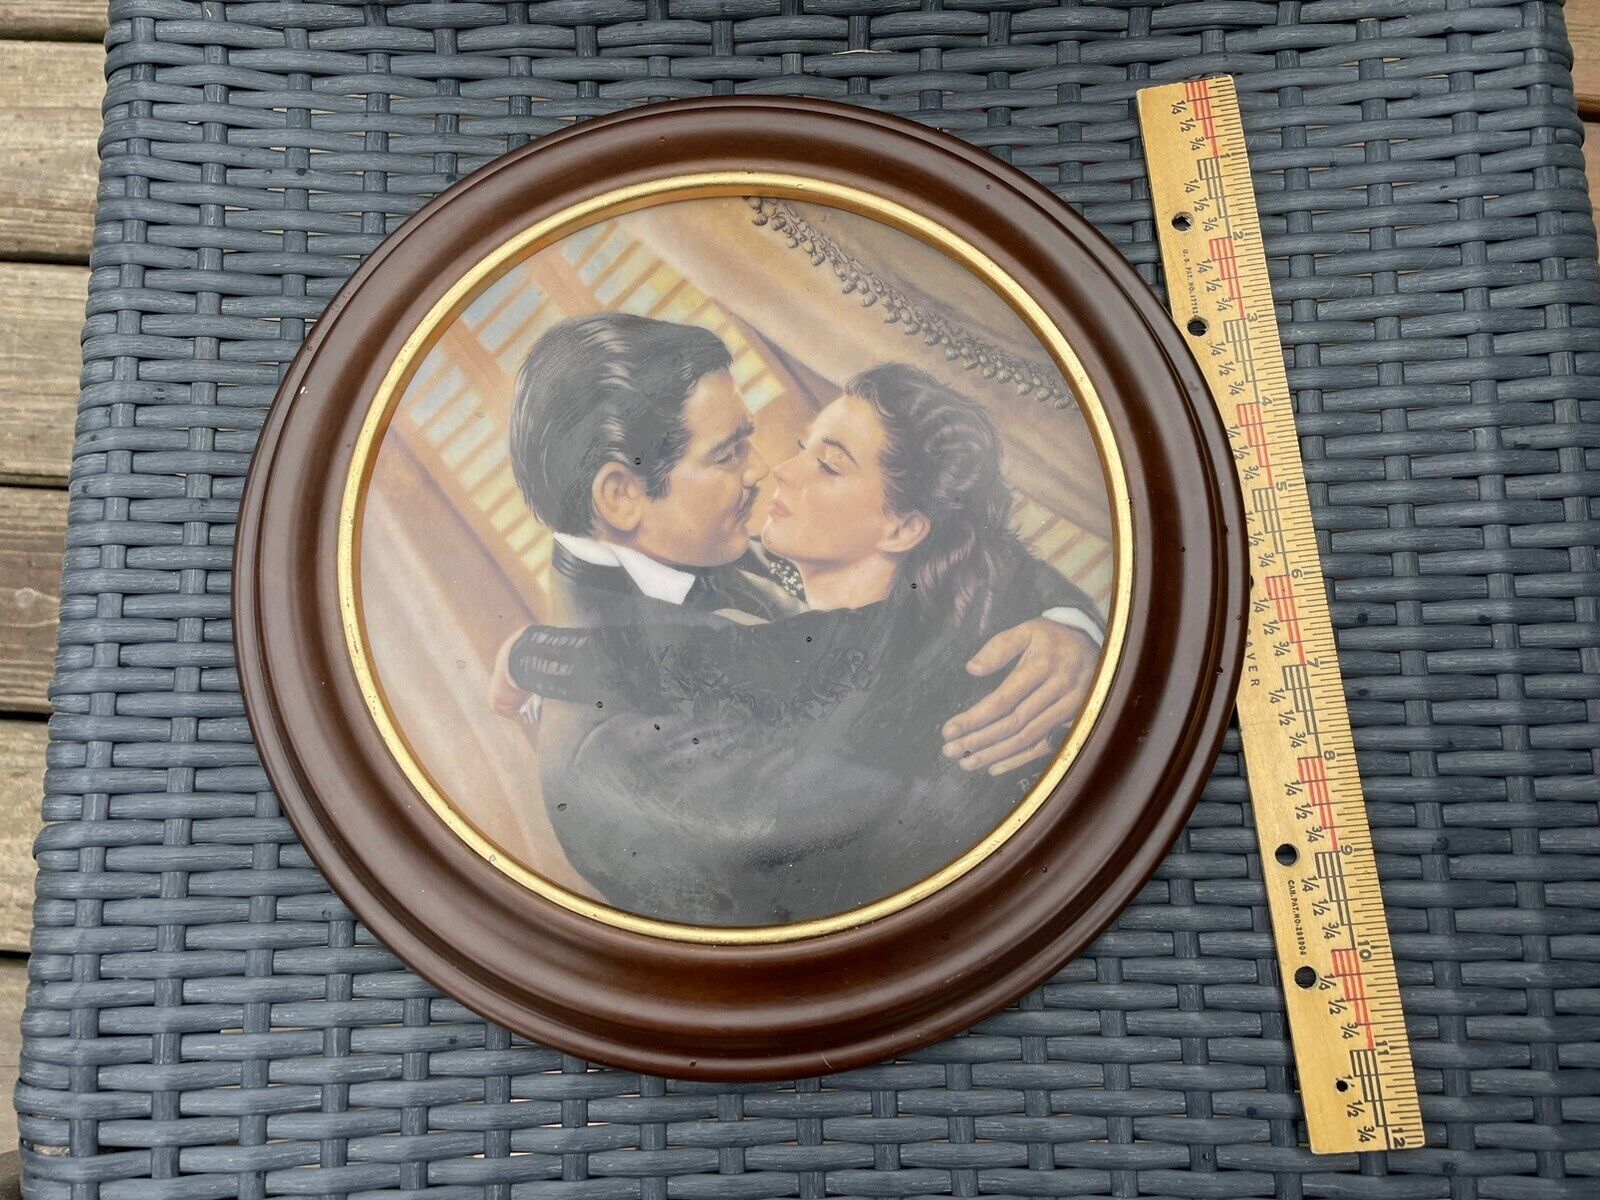 MARRY ME SCARLET pal jennis 1991 GONE WITH THE WIND SERIES NUMBERED PLATE FRAMED